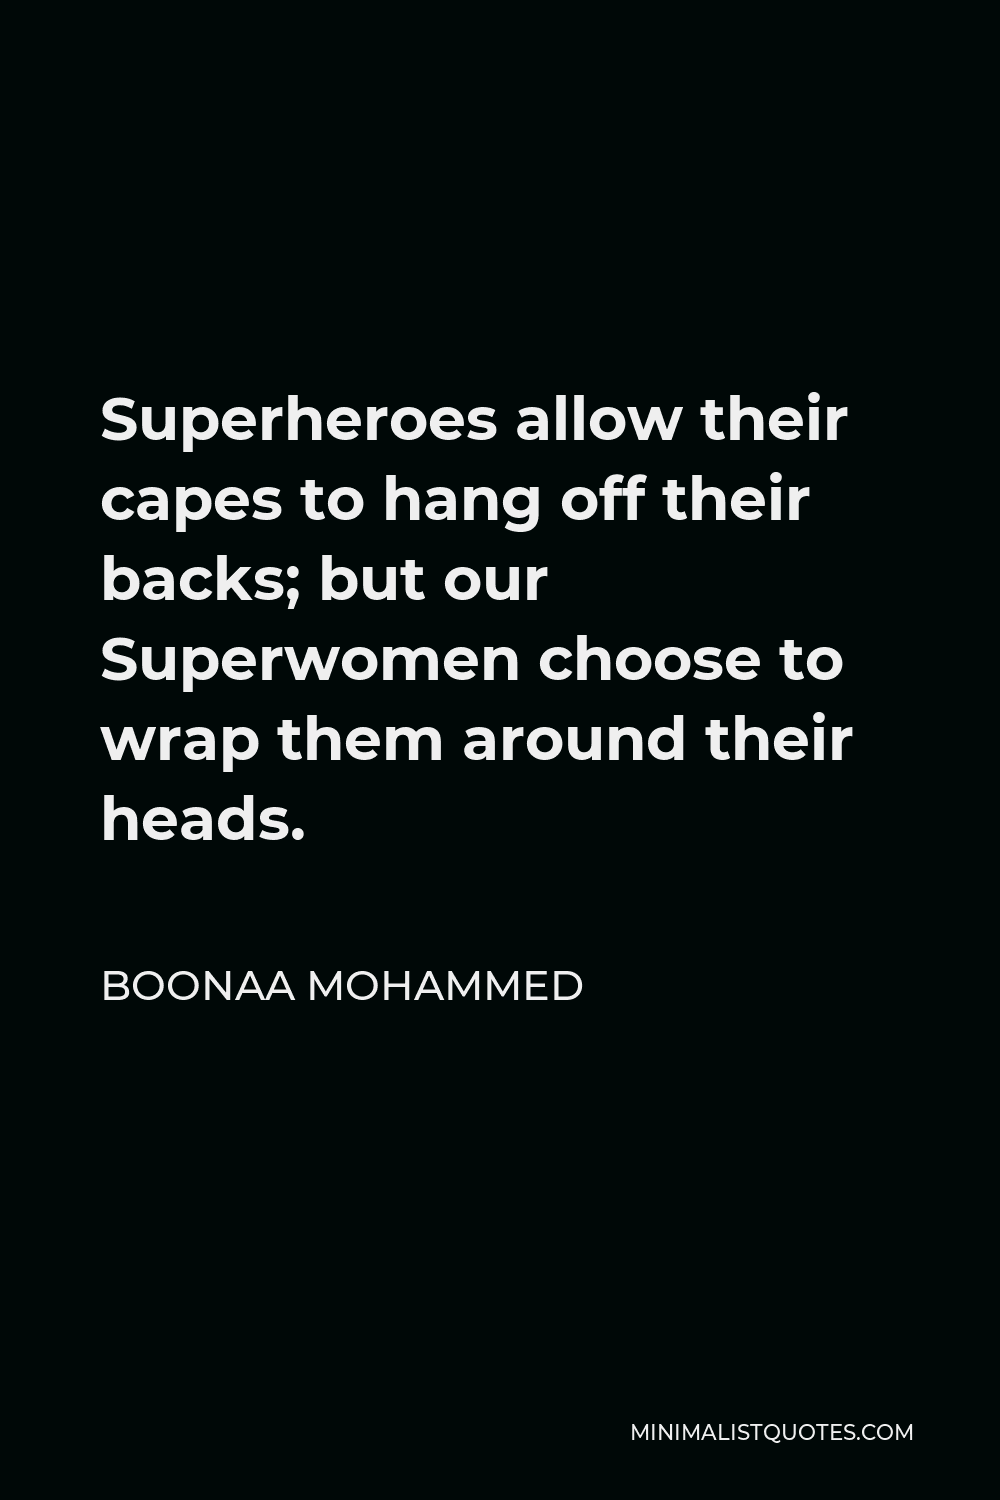 Boonaa Mohammed Quote - Superheroes allow their capes to hang off their backs; but our Superwomen choose to wrap them around their heads.